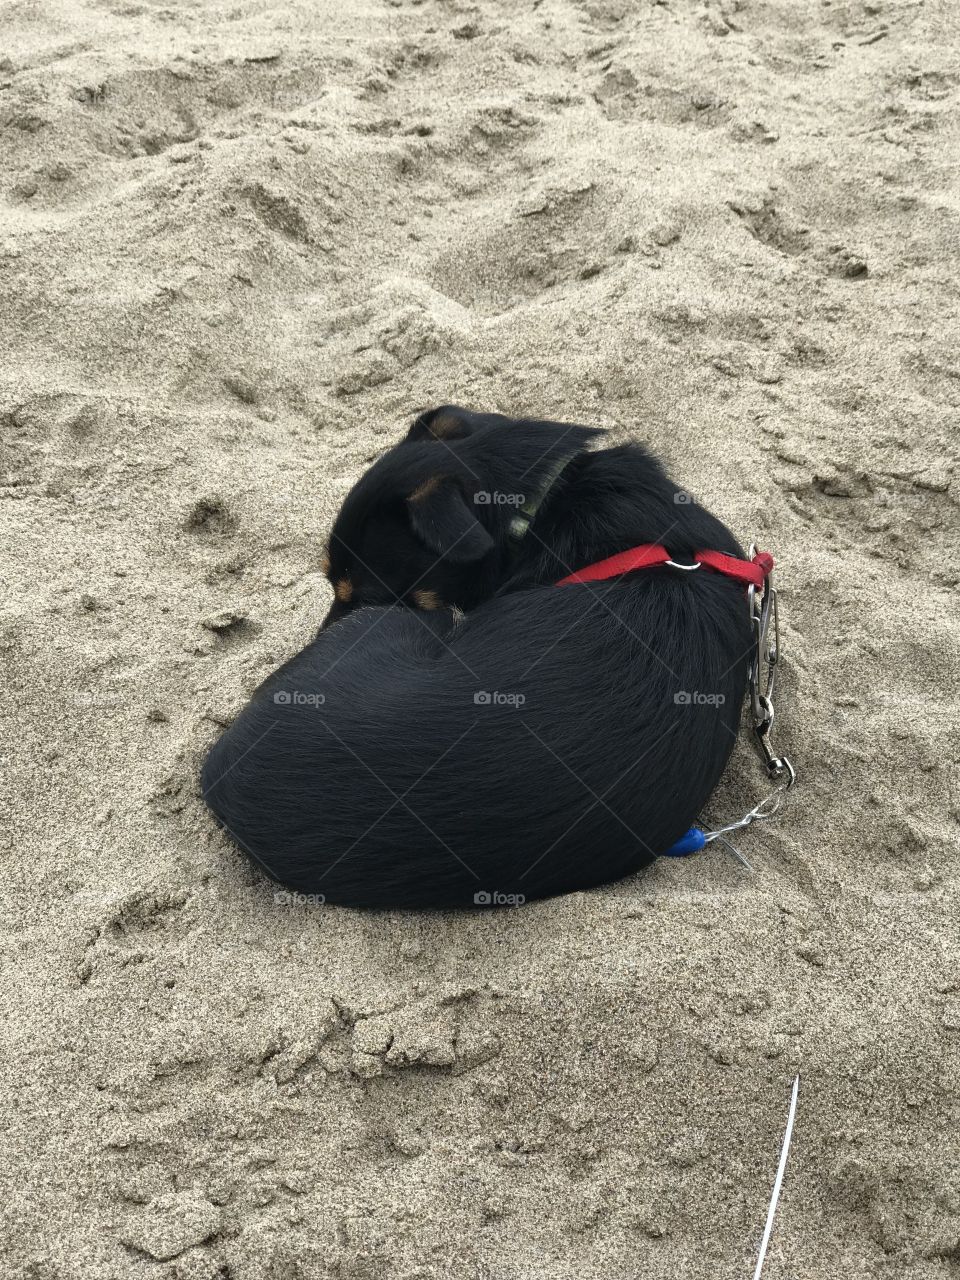 He had a very eventful day at Limantour Beach dog resting in ball